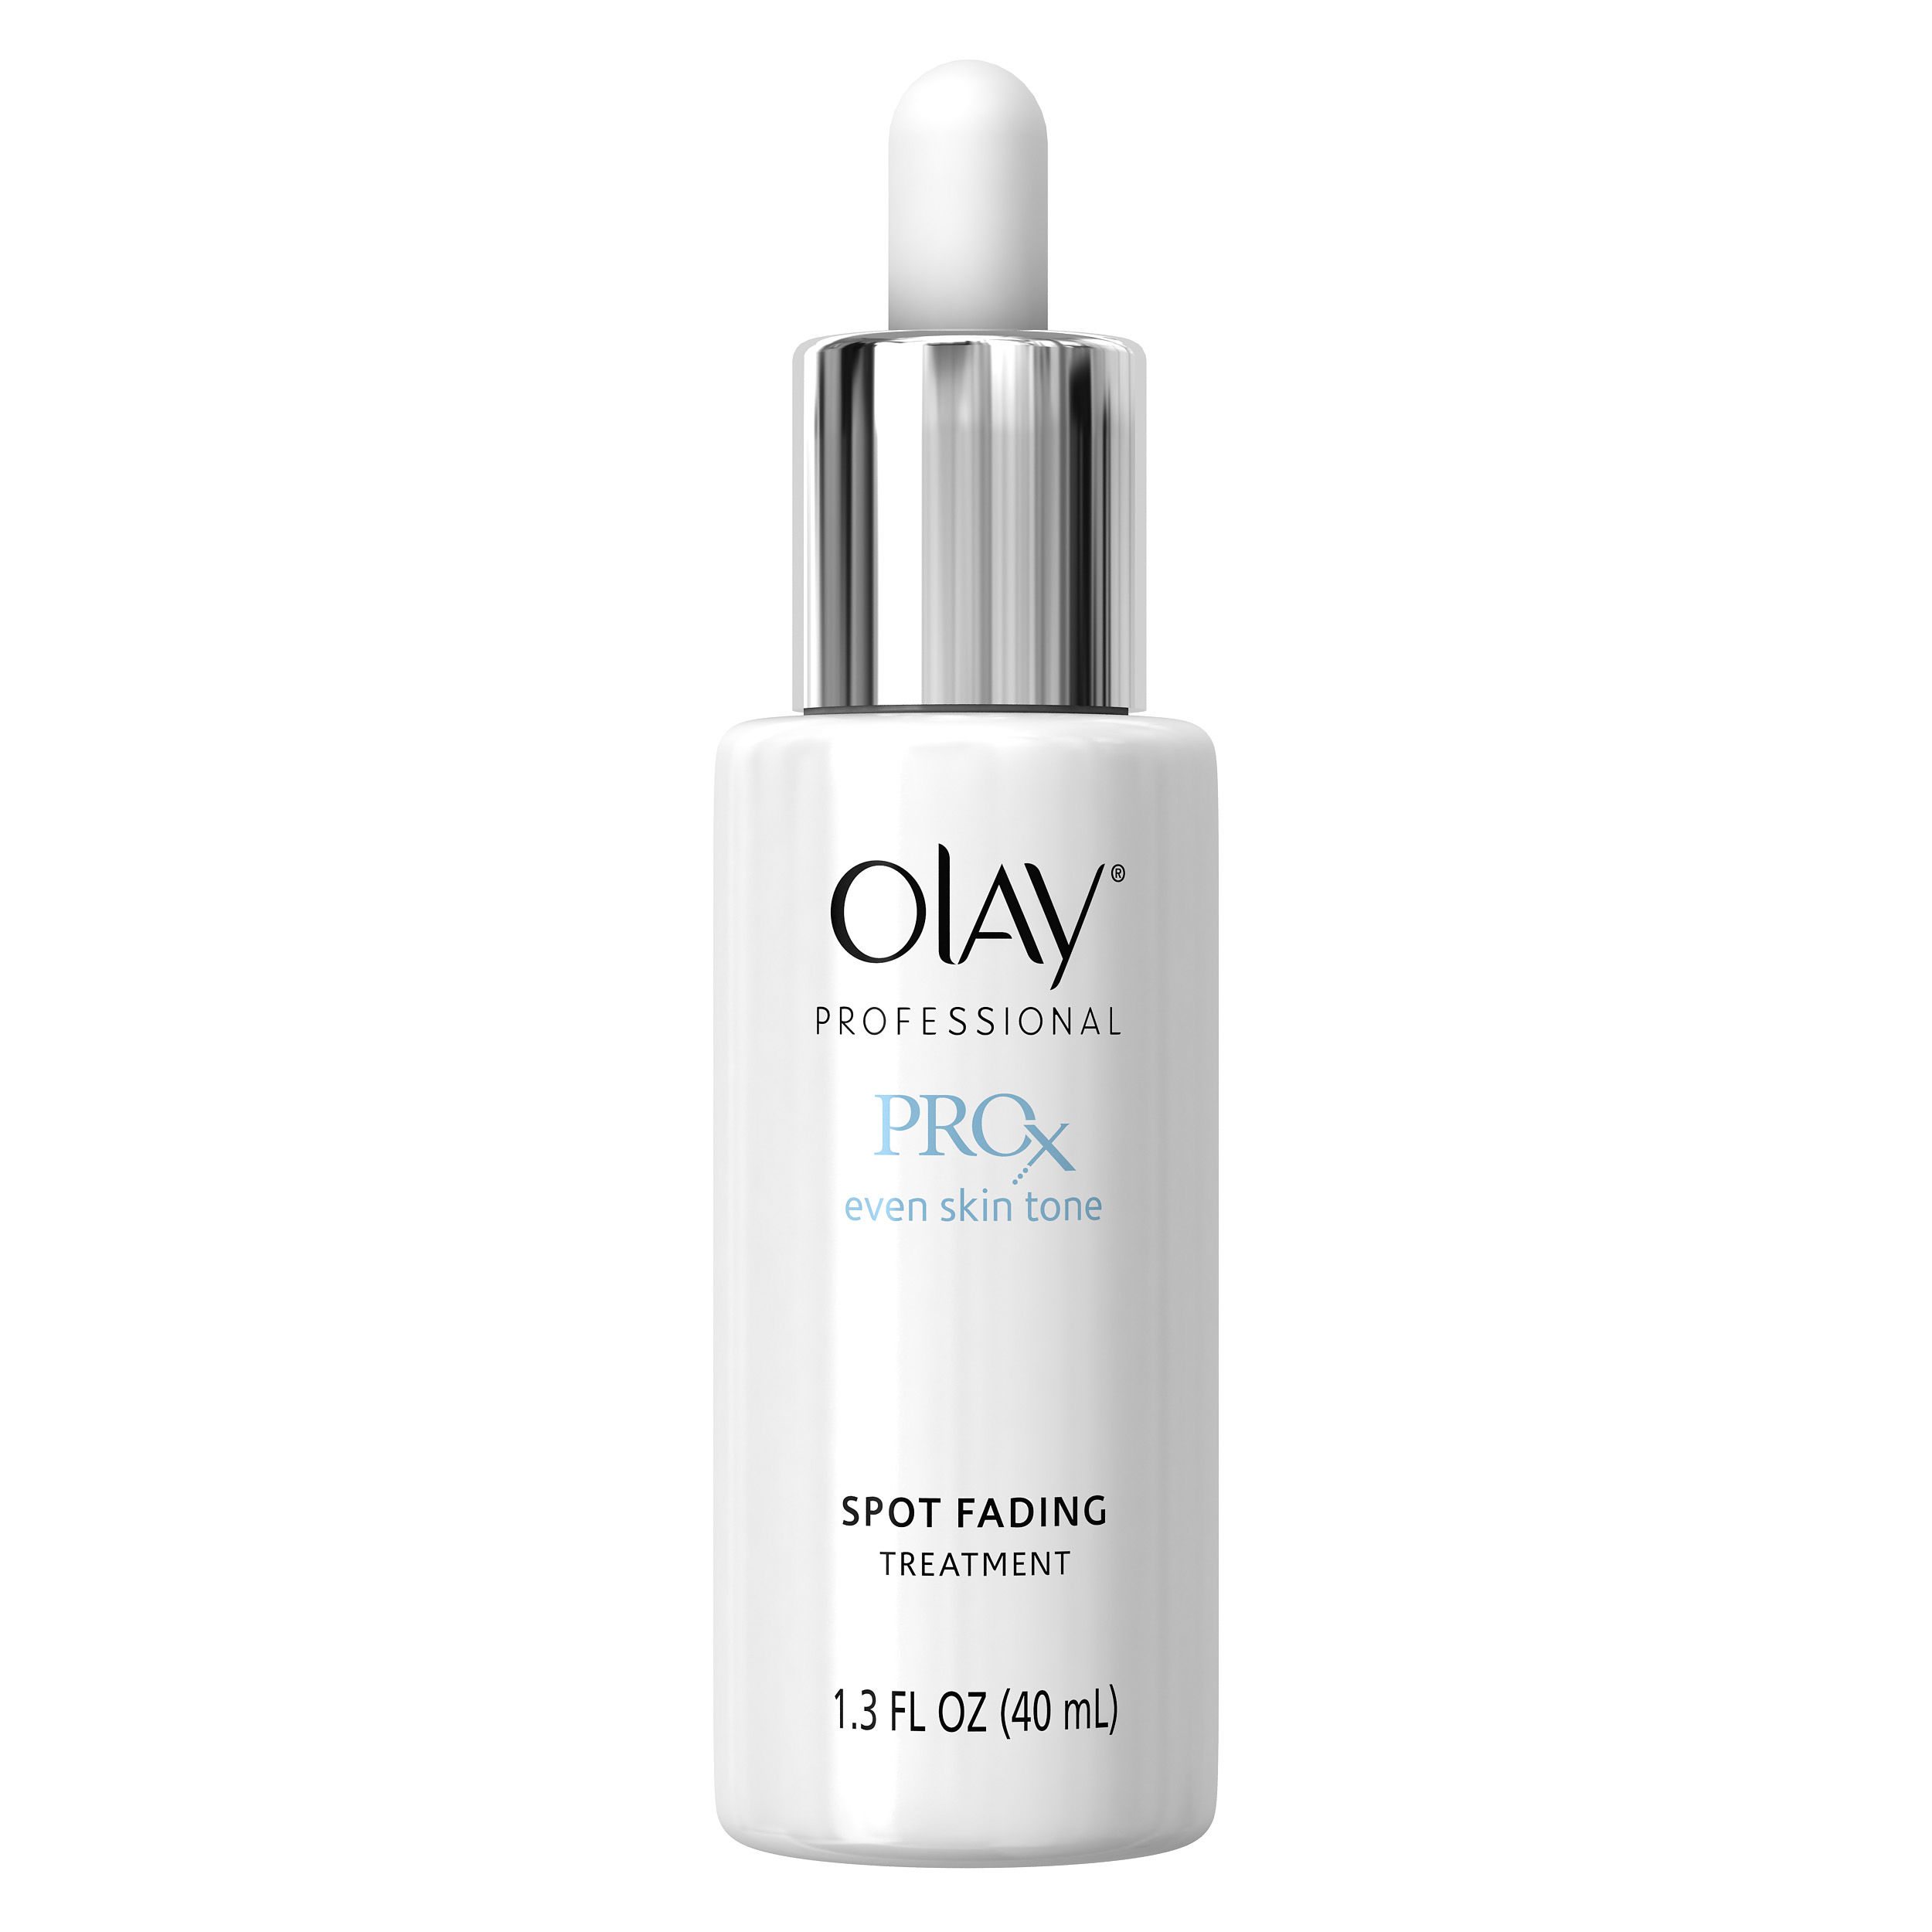 ProX by Olay Dermatological Anti-Aging Even Tone Spot Fading Treatment, 1.3 oz